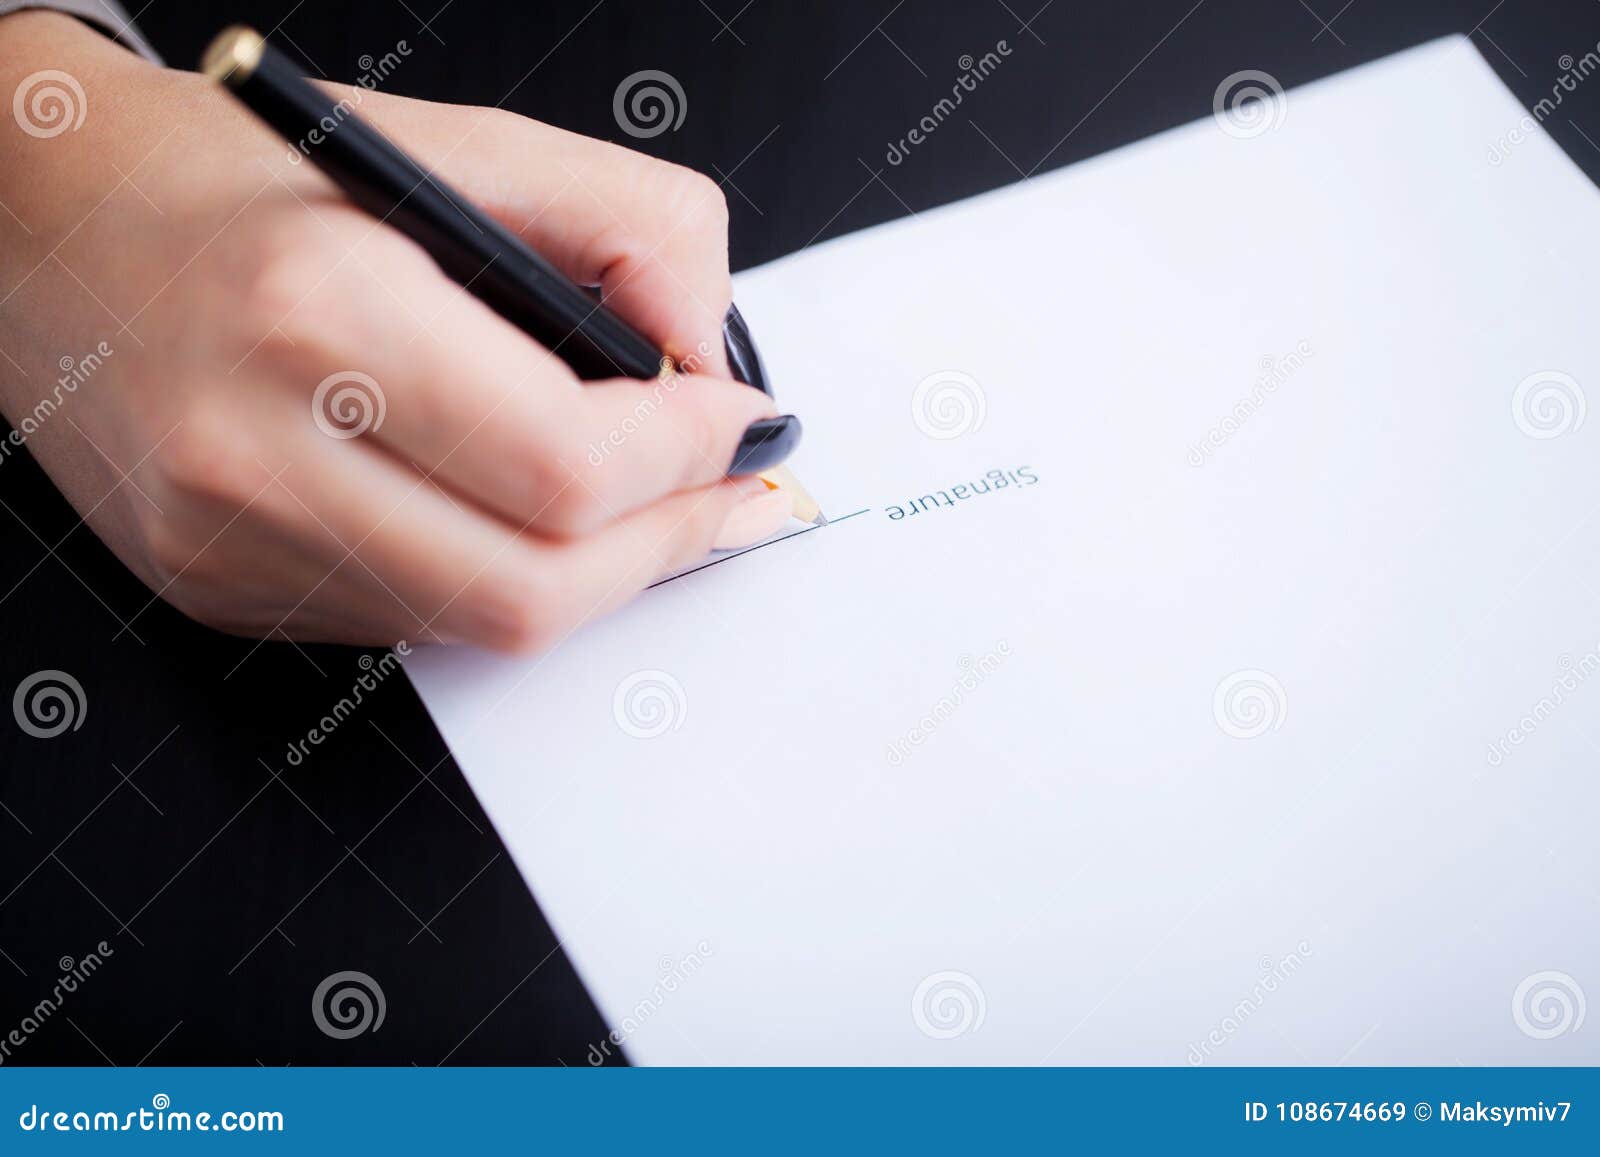 Business Woman Signing a Contract Above Signature Line Stock Image ...